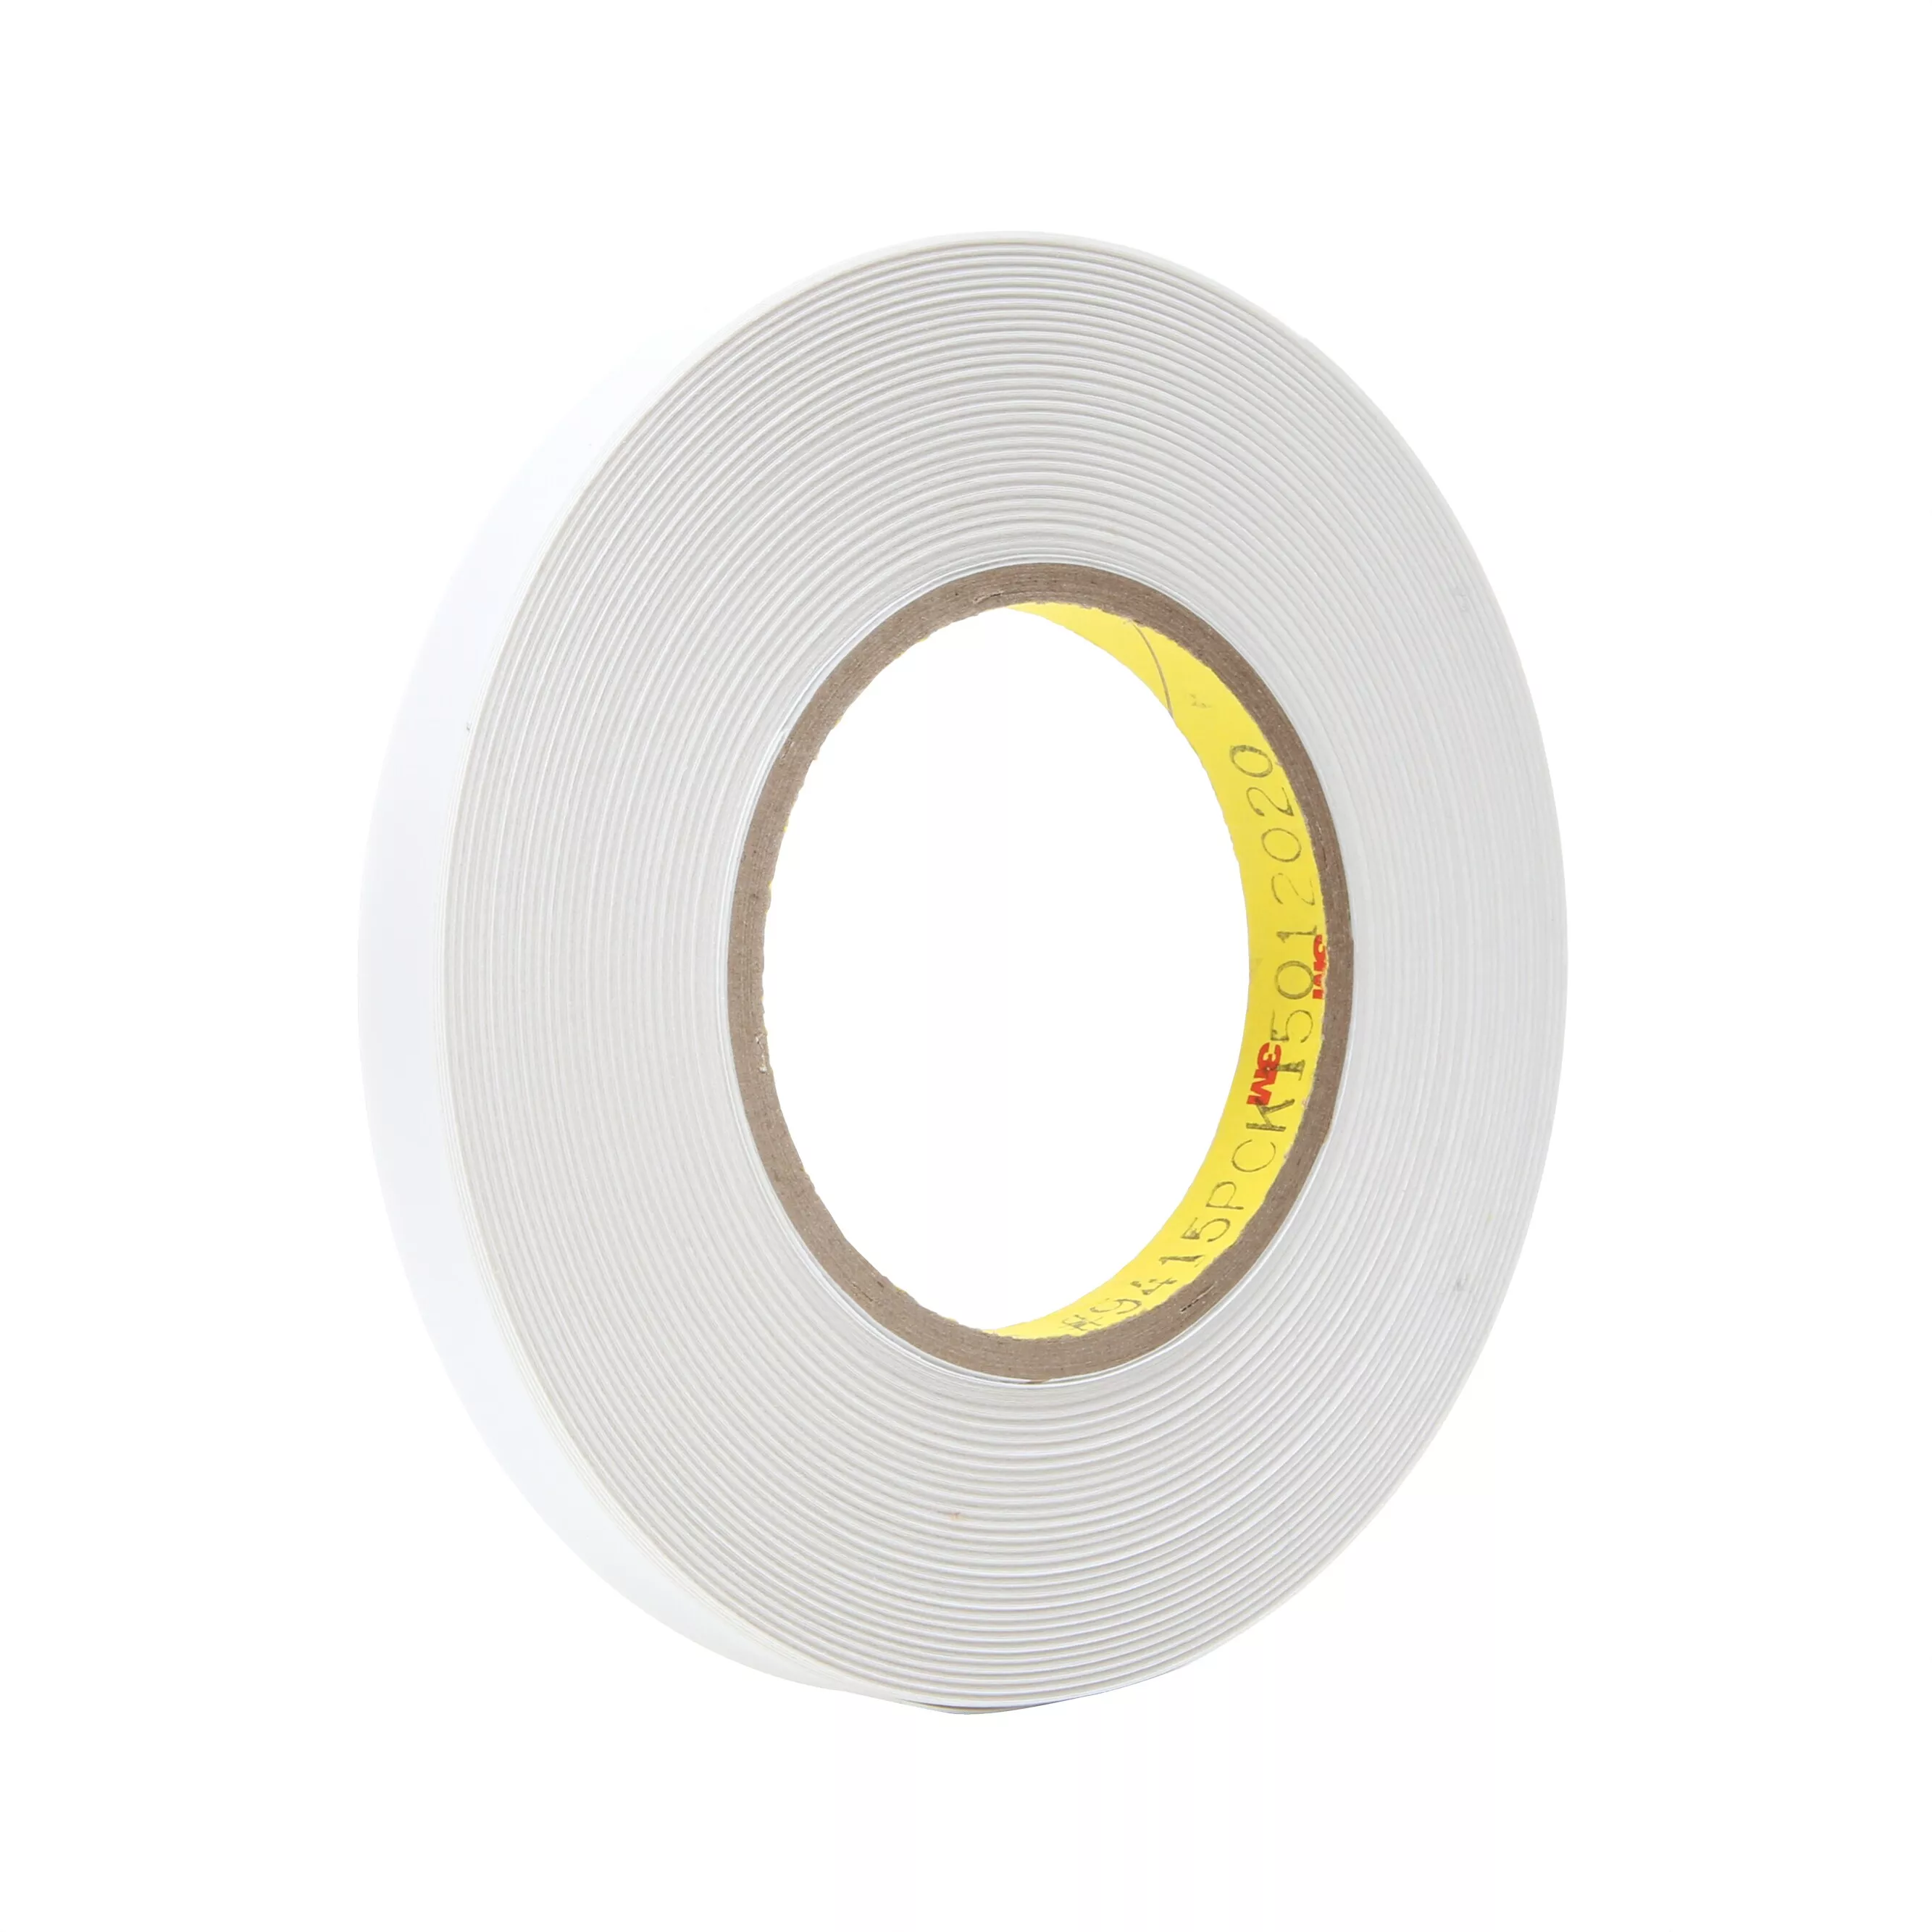 3M™ Removable Repositionable Tape 9415PC, Clear, 4 in x 72 yd, 2 mil, 8
Rolls/Case